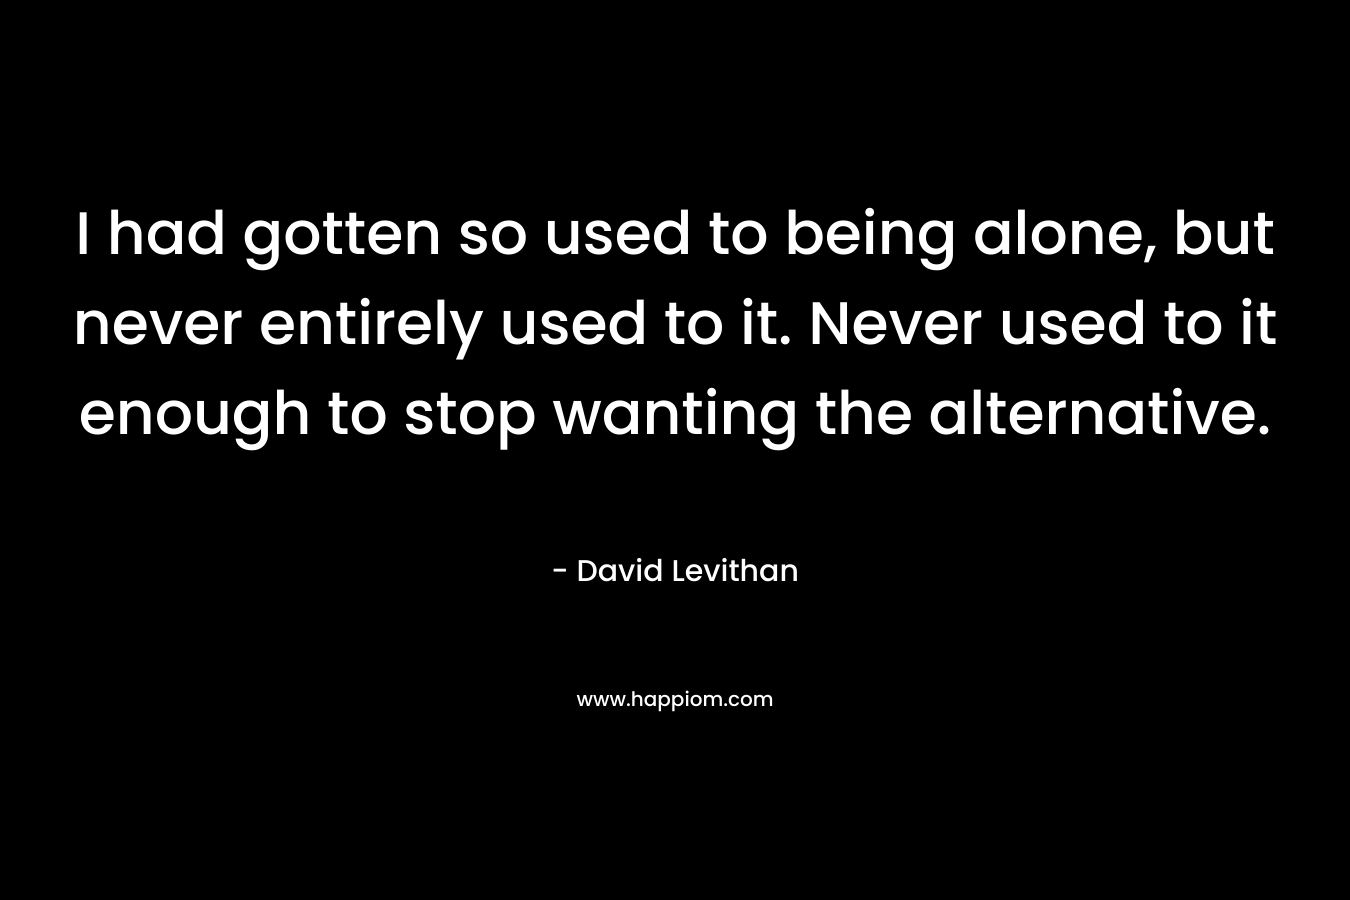 I had gotten so used to being alone, but never entirely used to it. Never used to it enough to stop wanting the alternative.